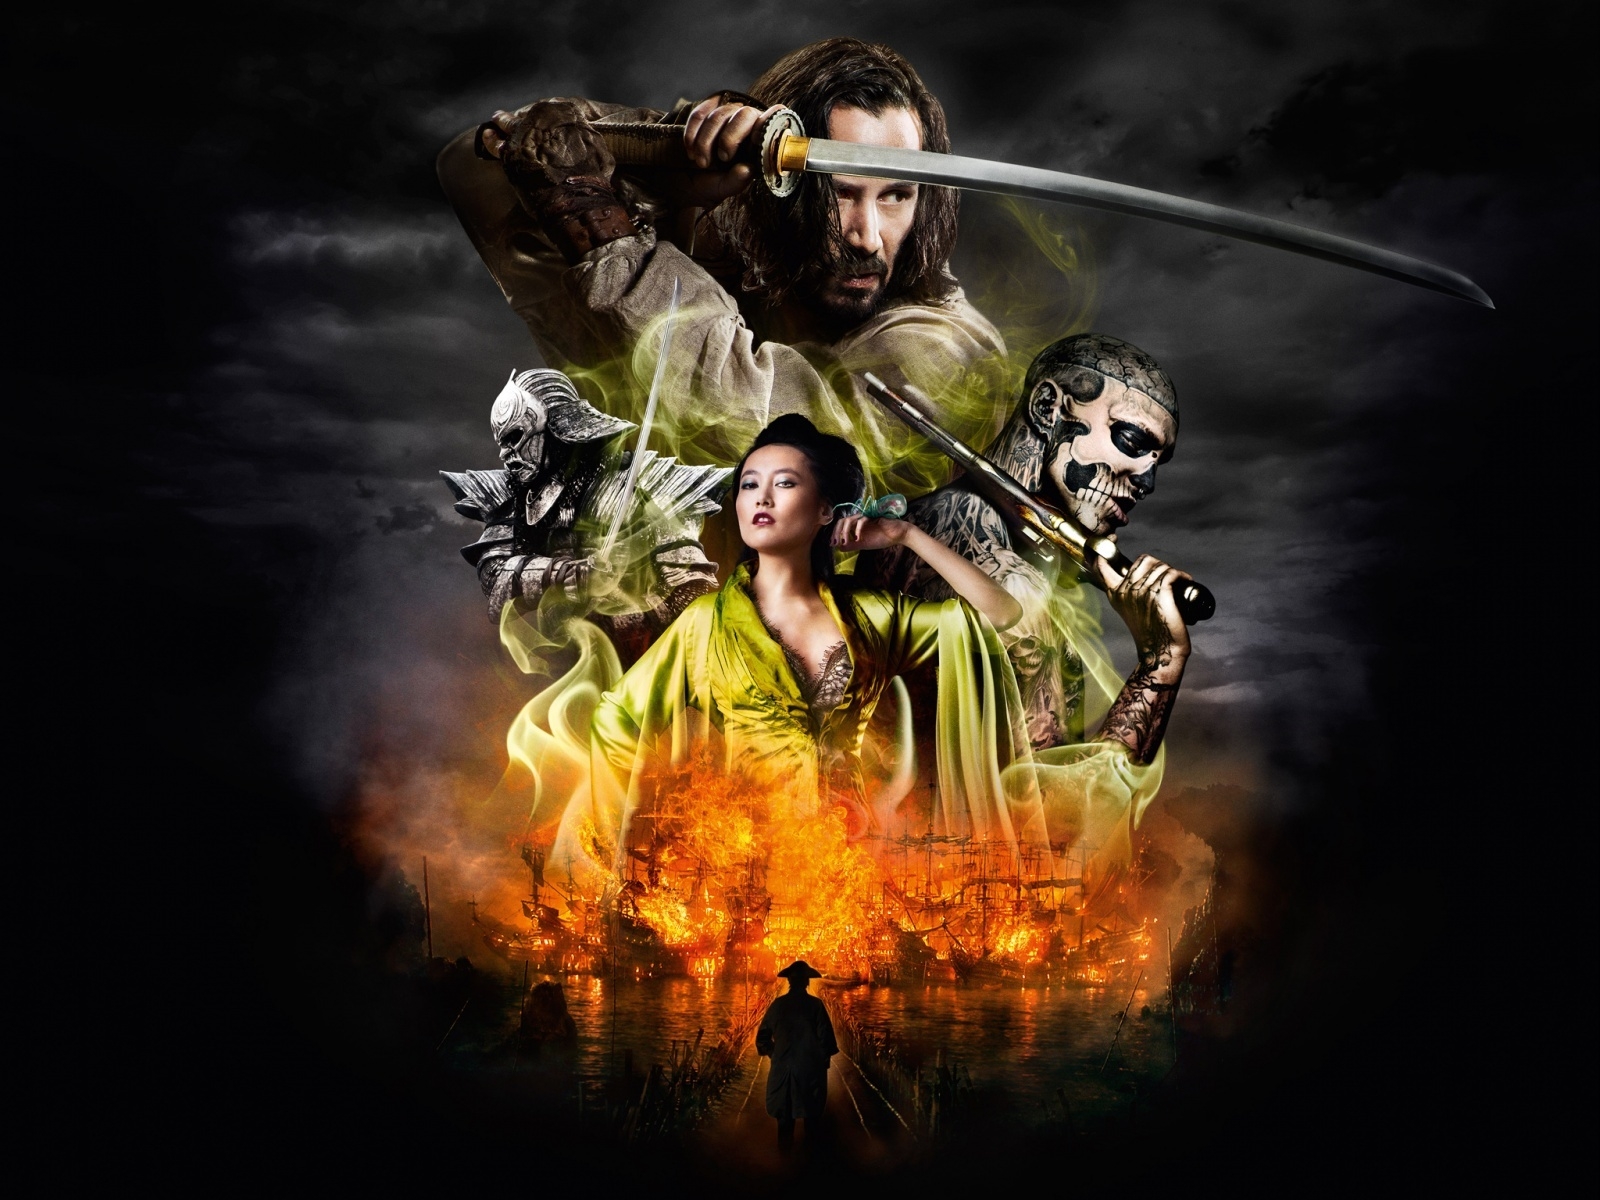 47 Ronin for 1600 x 1200 resolution